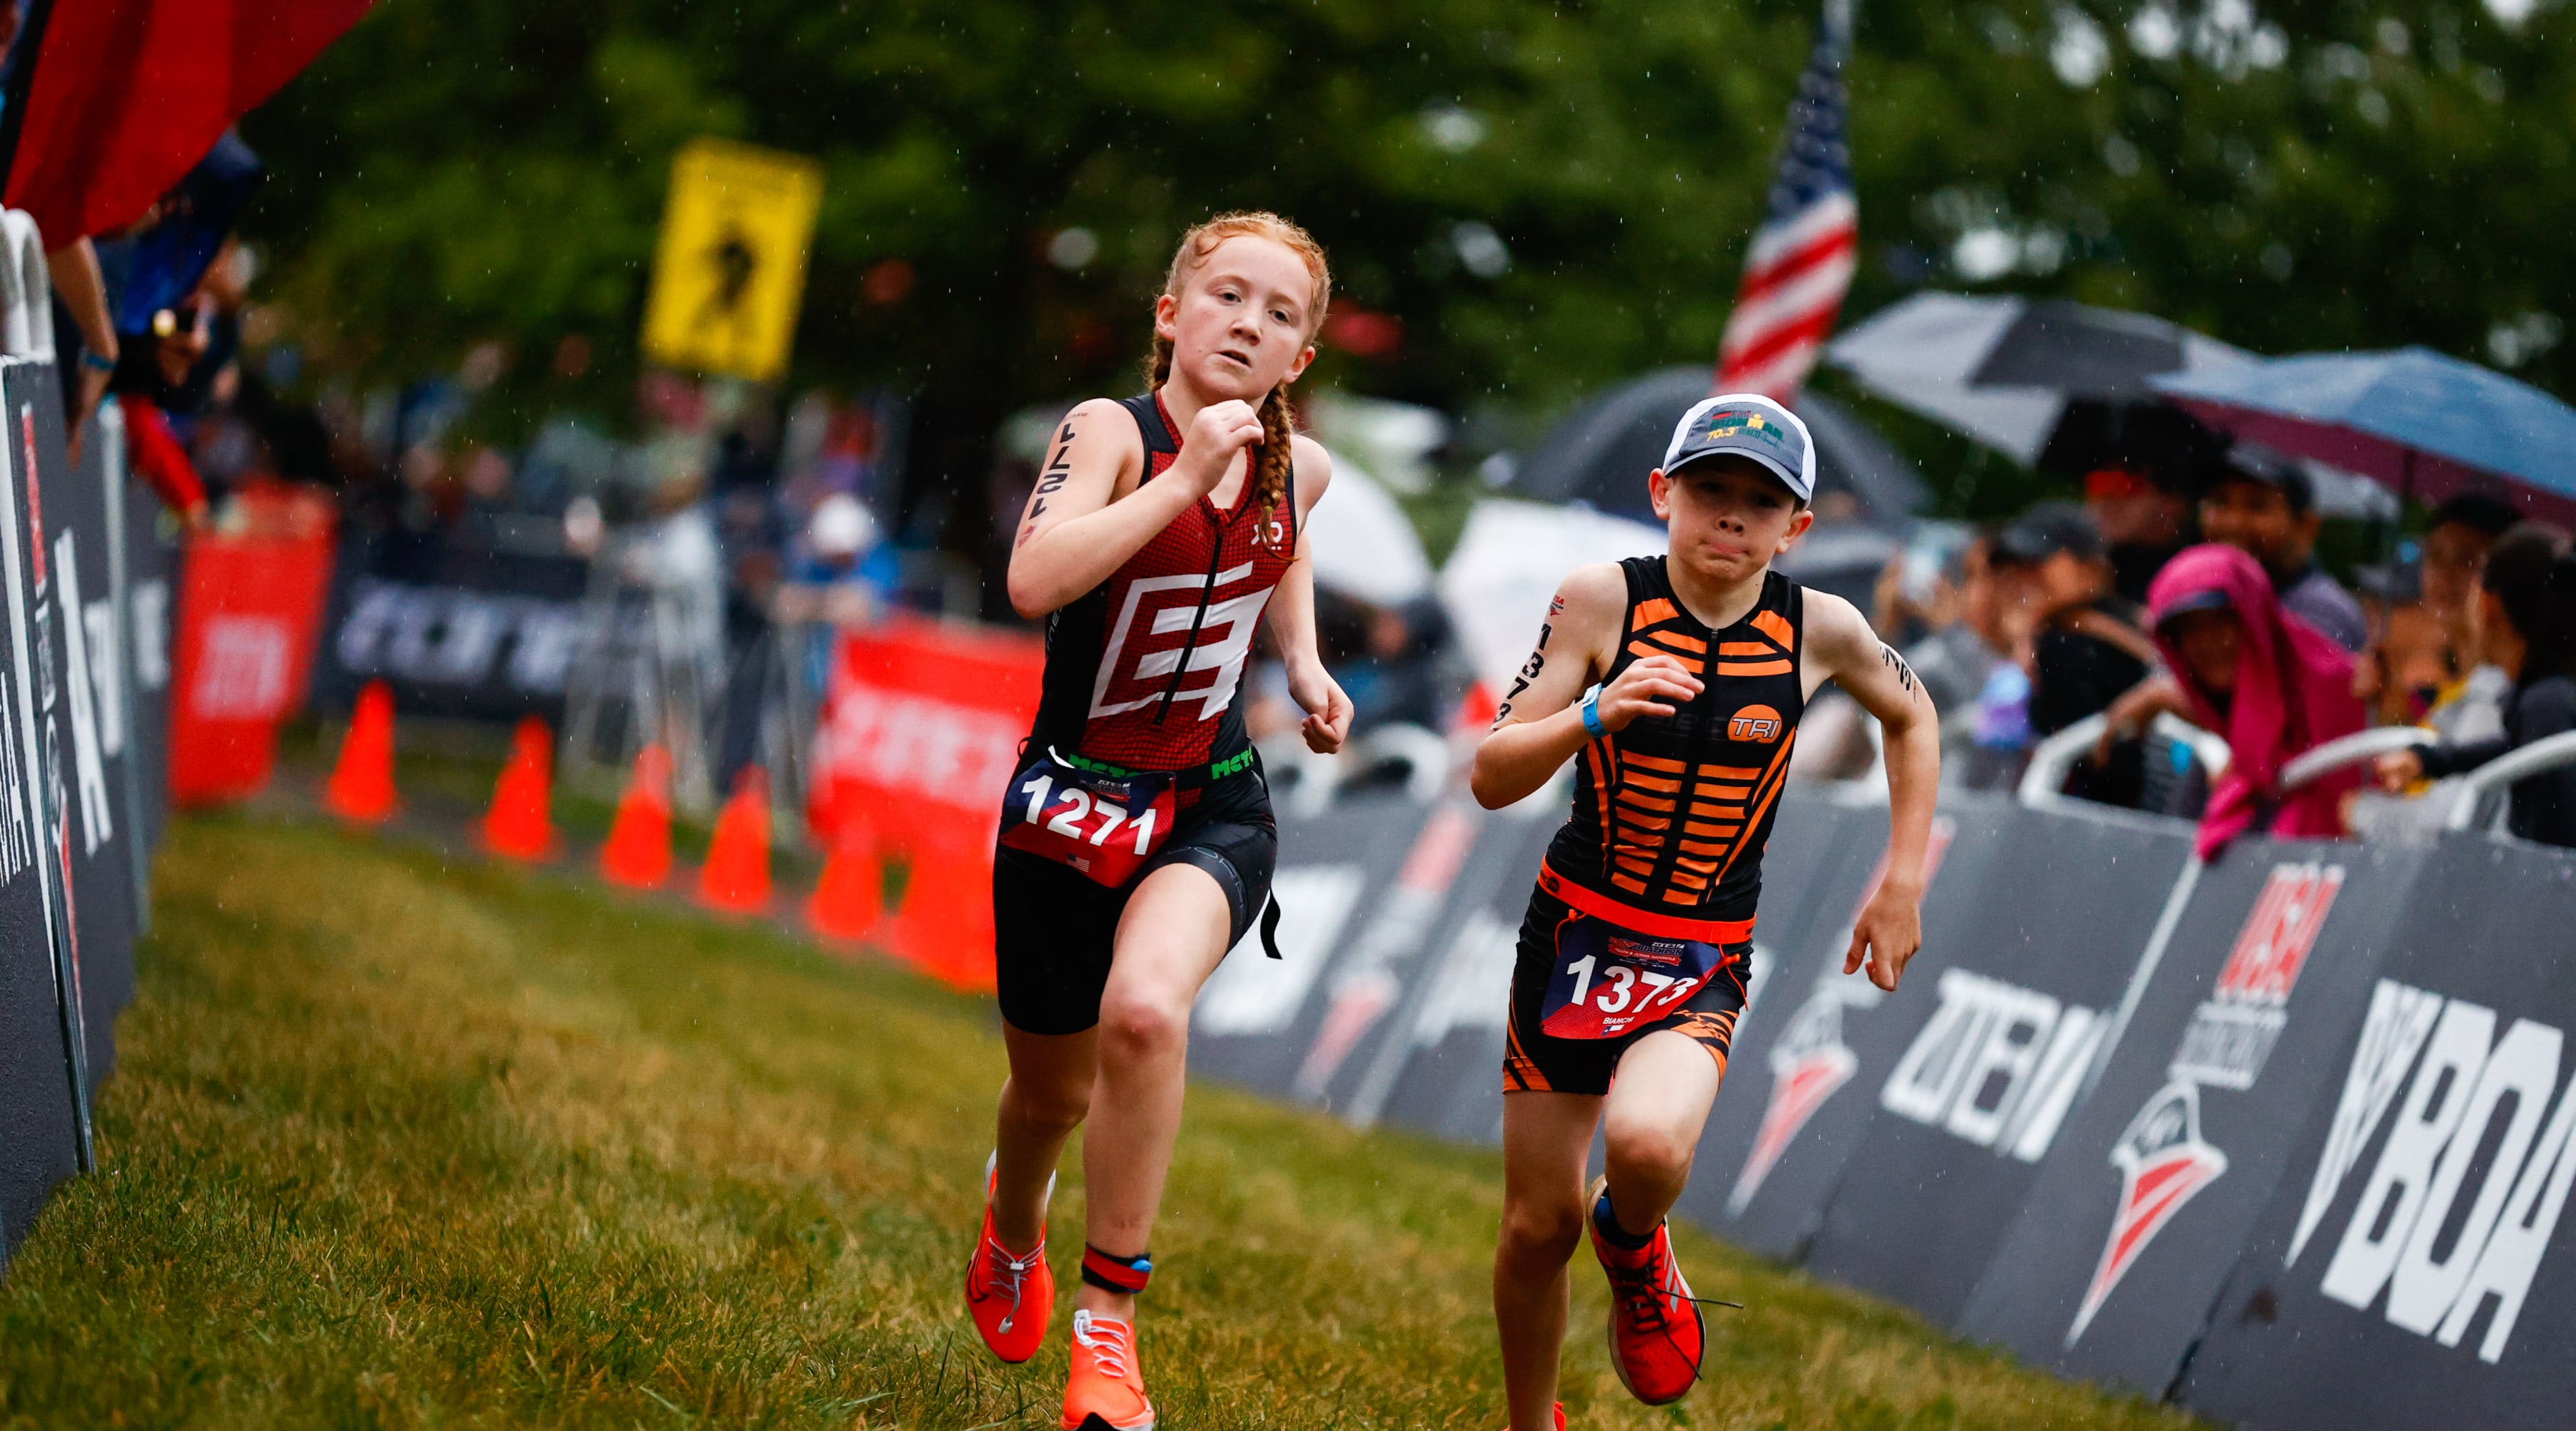 Two youth athletes sprint side by side down the finishing chute.